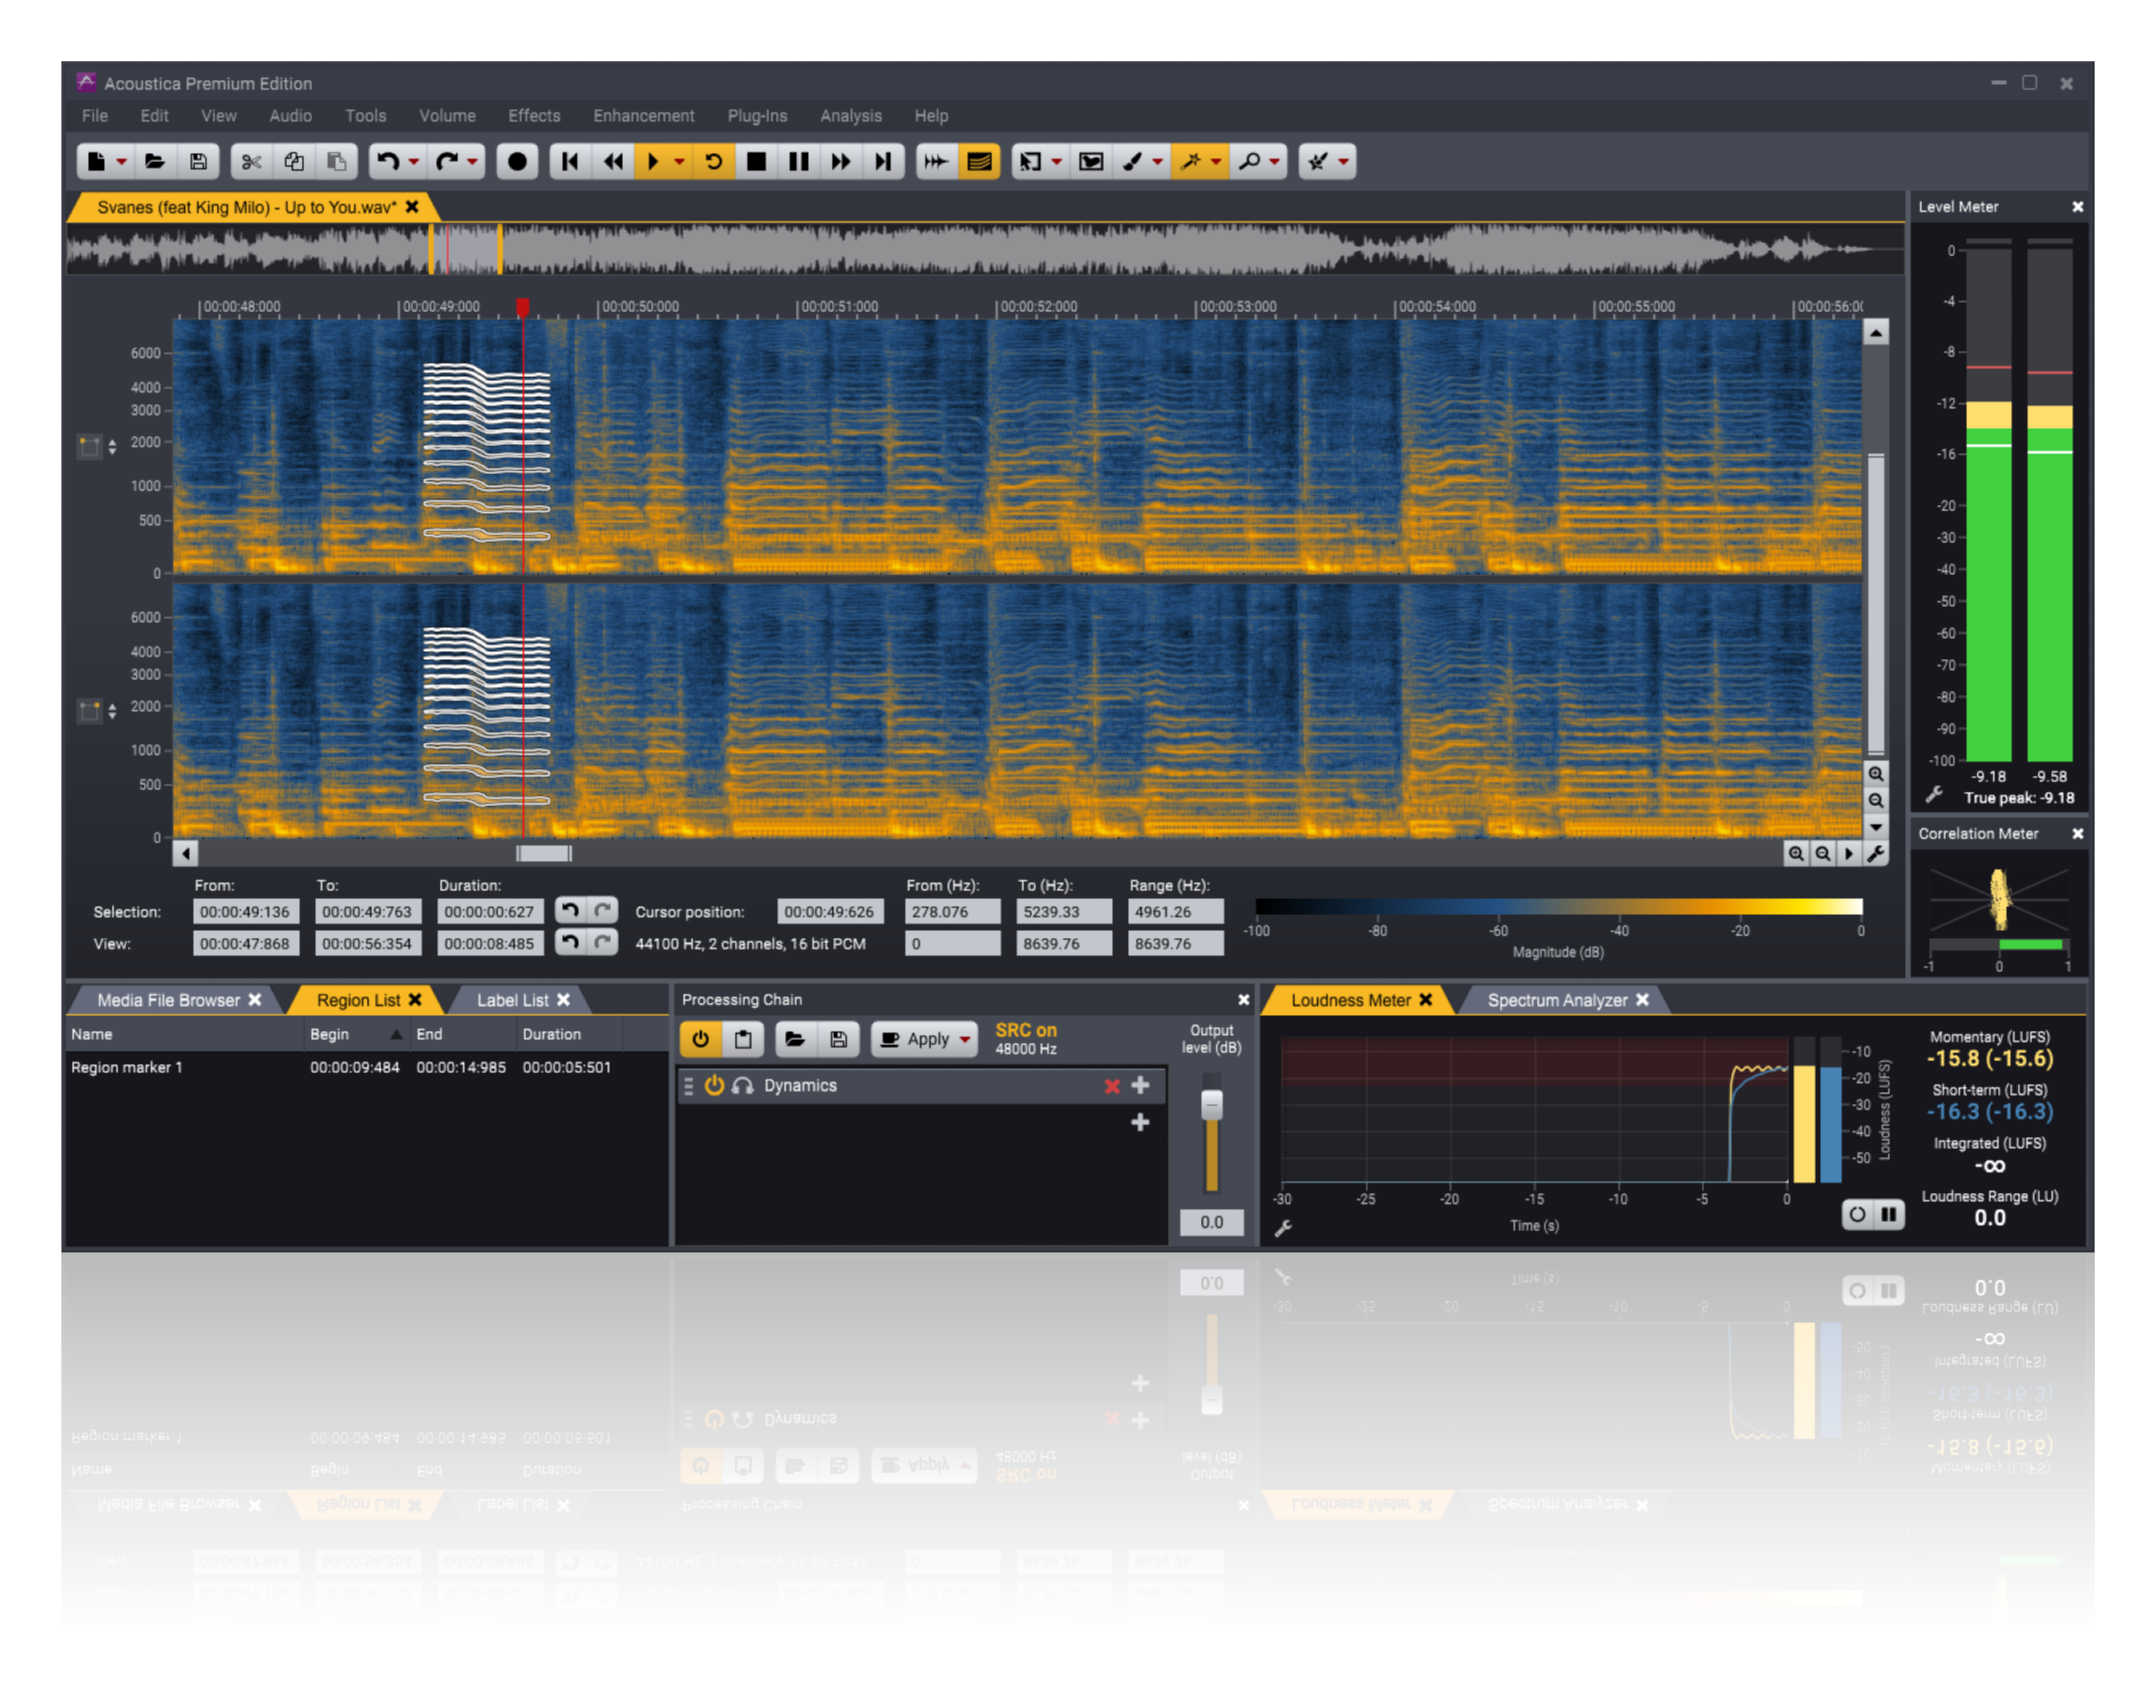 Acoustica for Mac 7.3.22